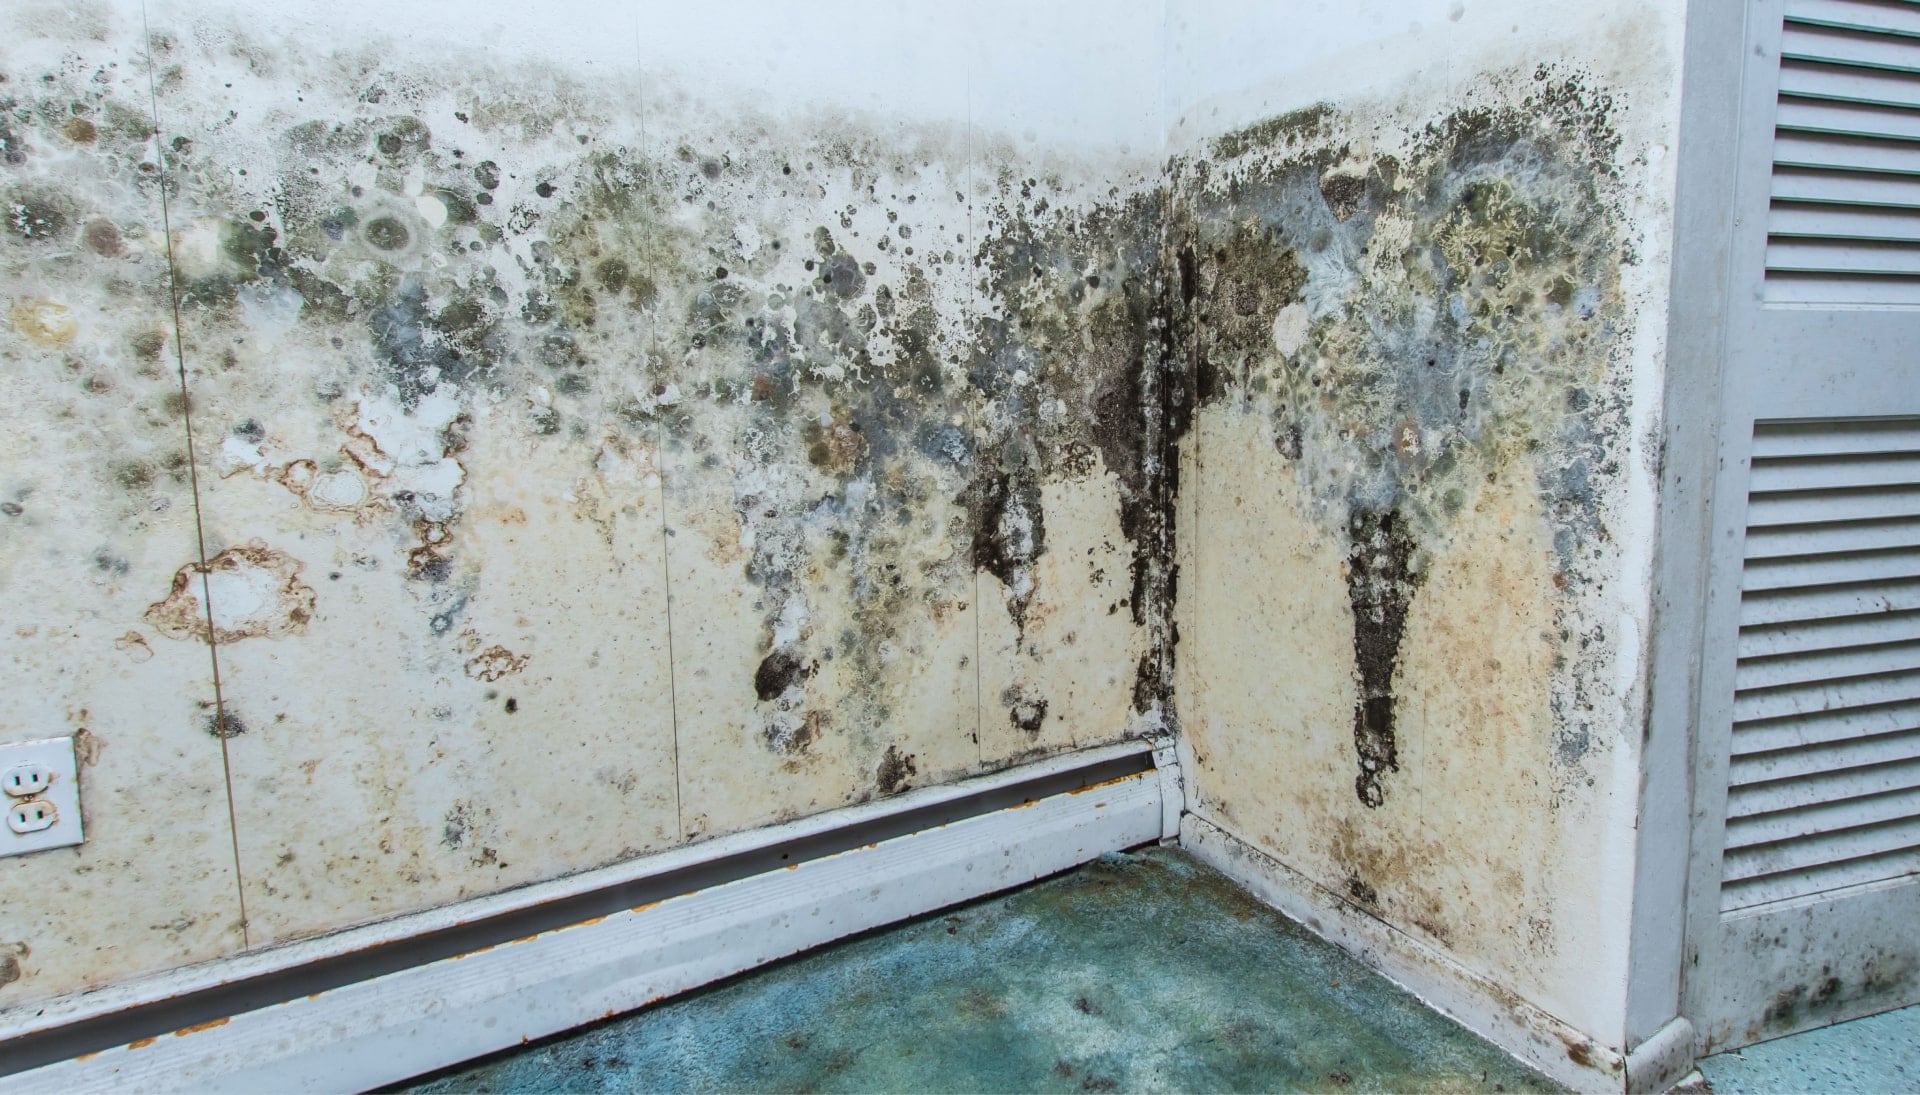 Professional mold removal, odor control, and water damage restoration service in Provo, Utah.